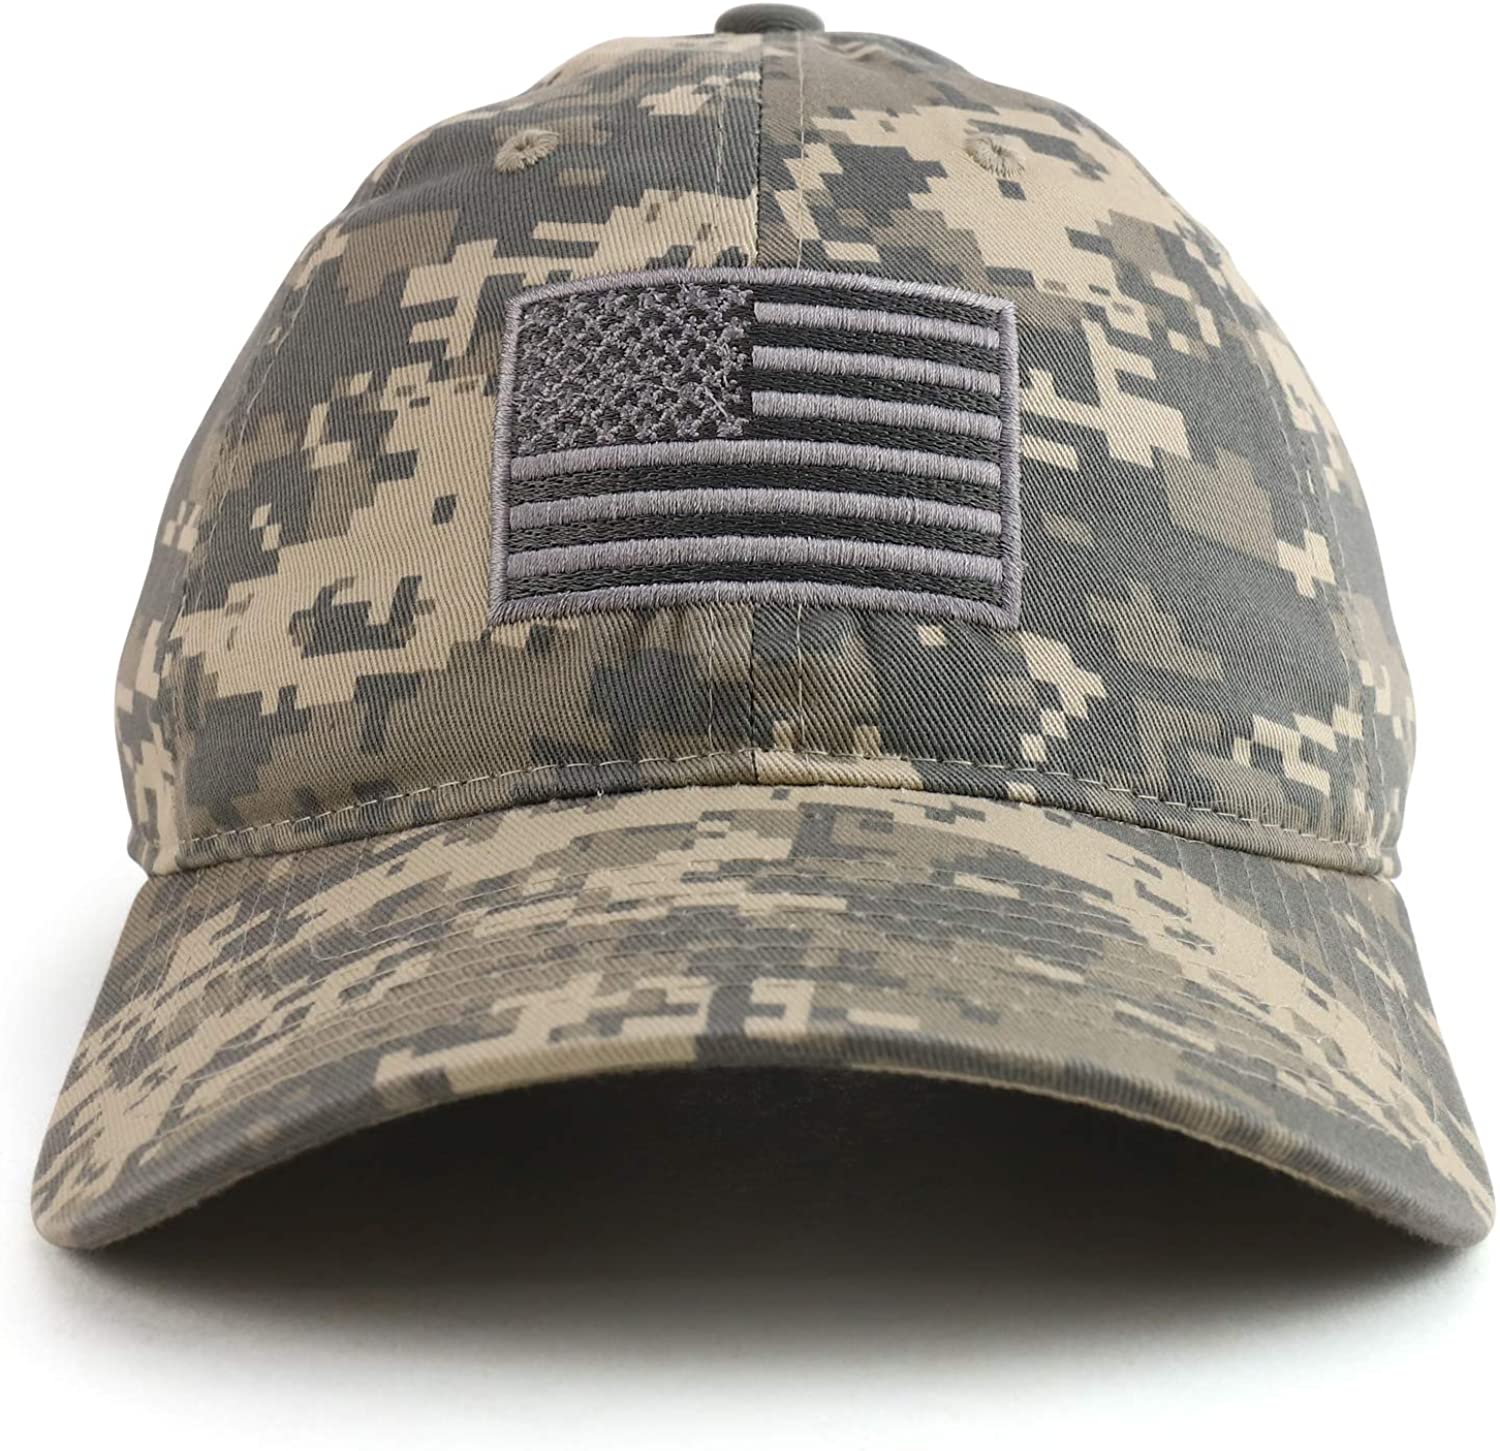 Rapid Dominance American Flag Embroidered Washed Cotton Camo Cap